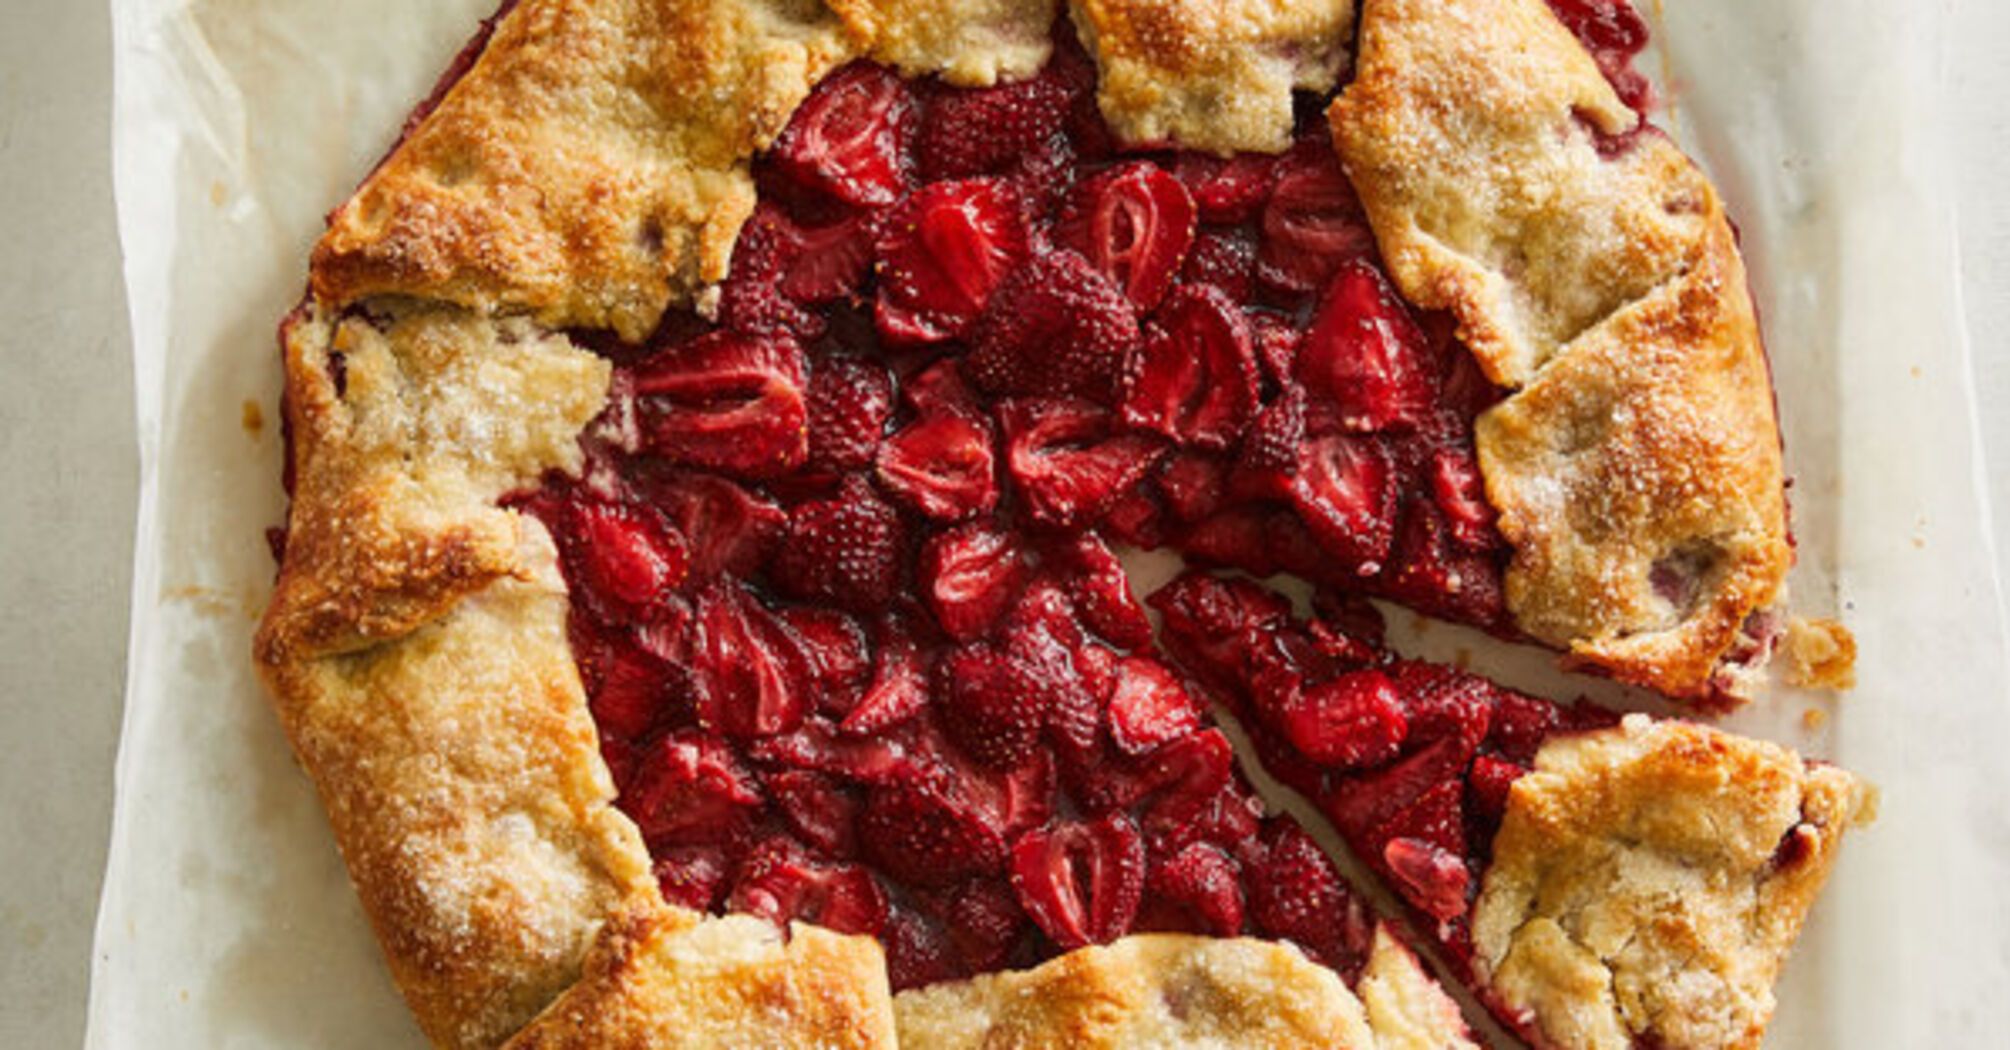 How to make a crispy seasonal galette with juicy strawberries: better than any cake